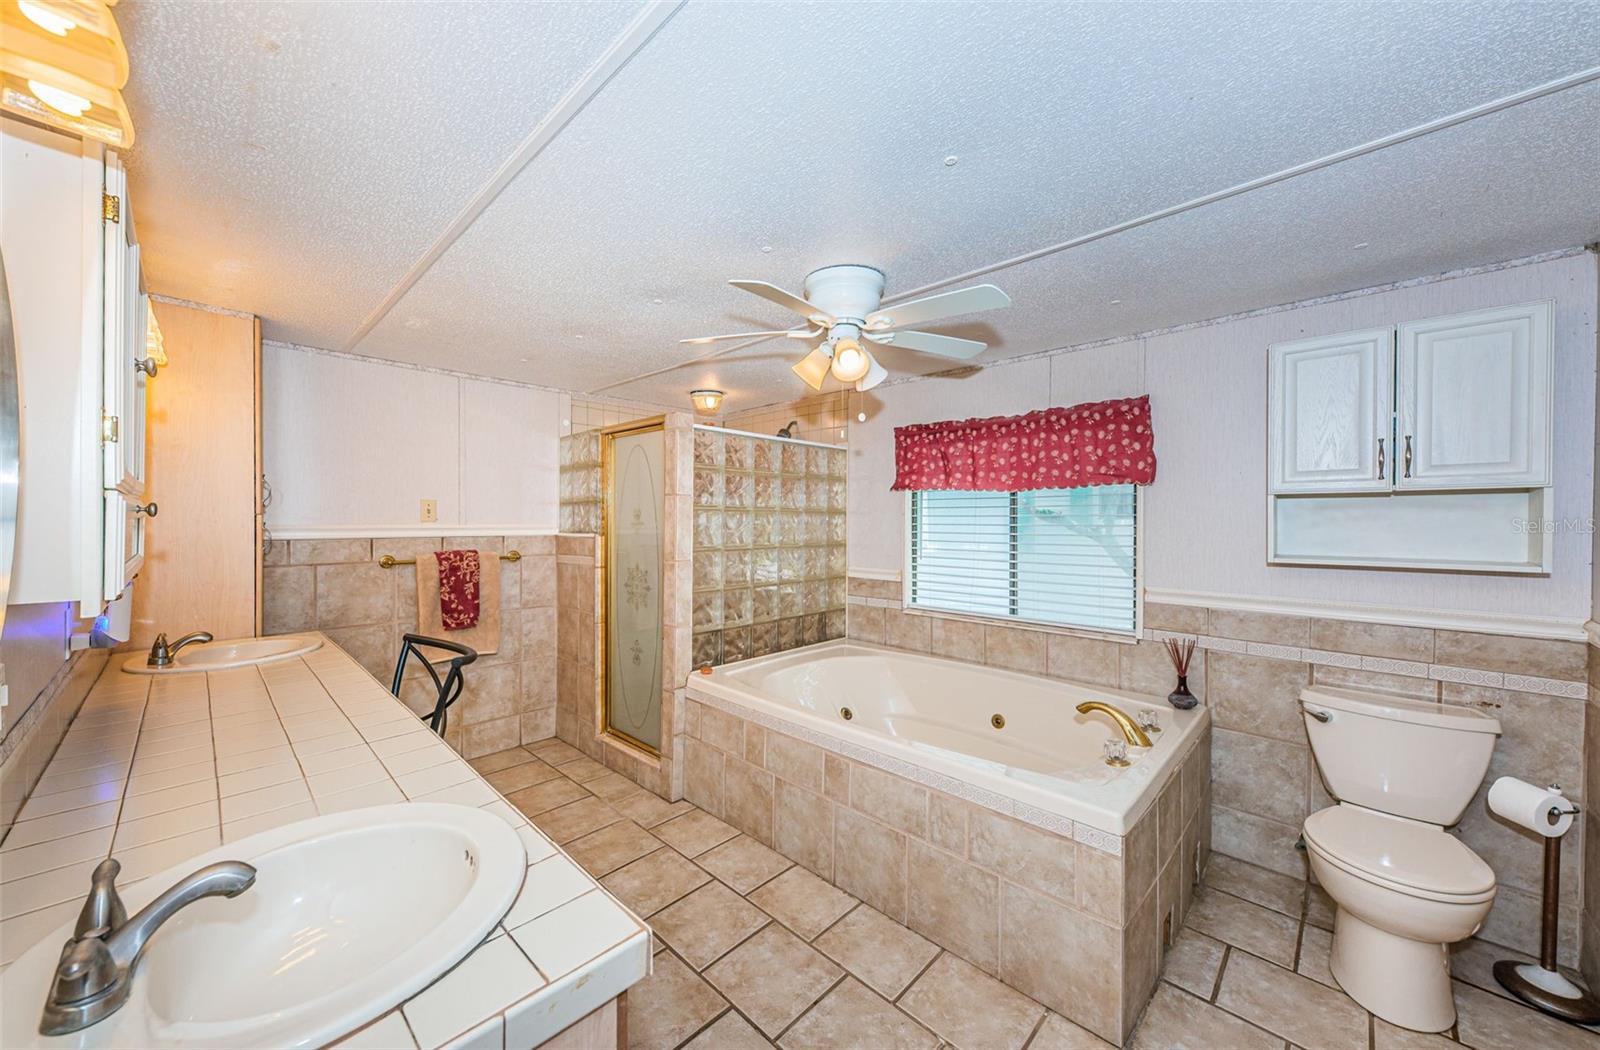 Bathroom with shower and oversized soaking tub